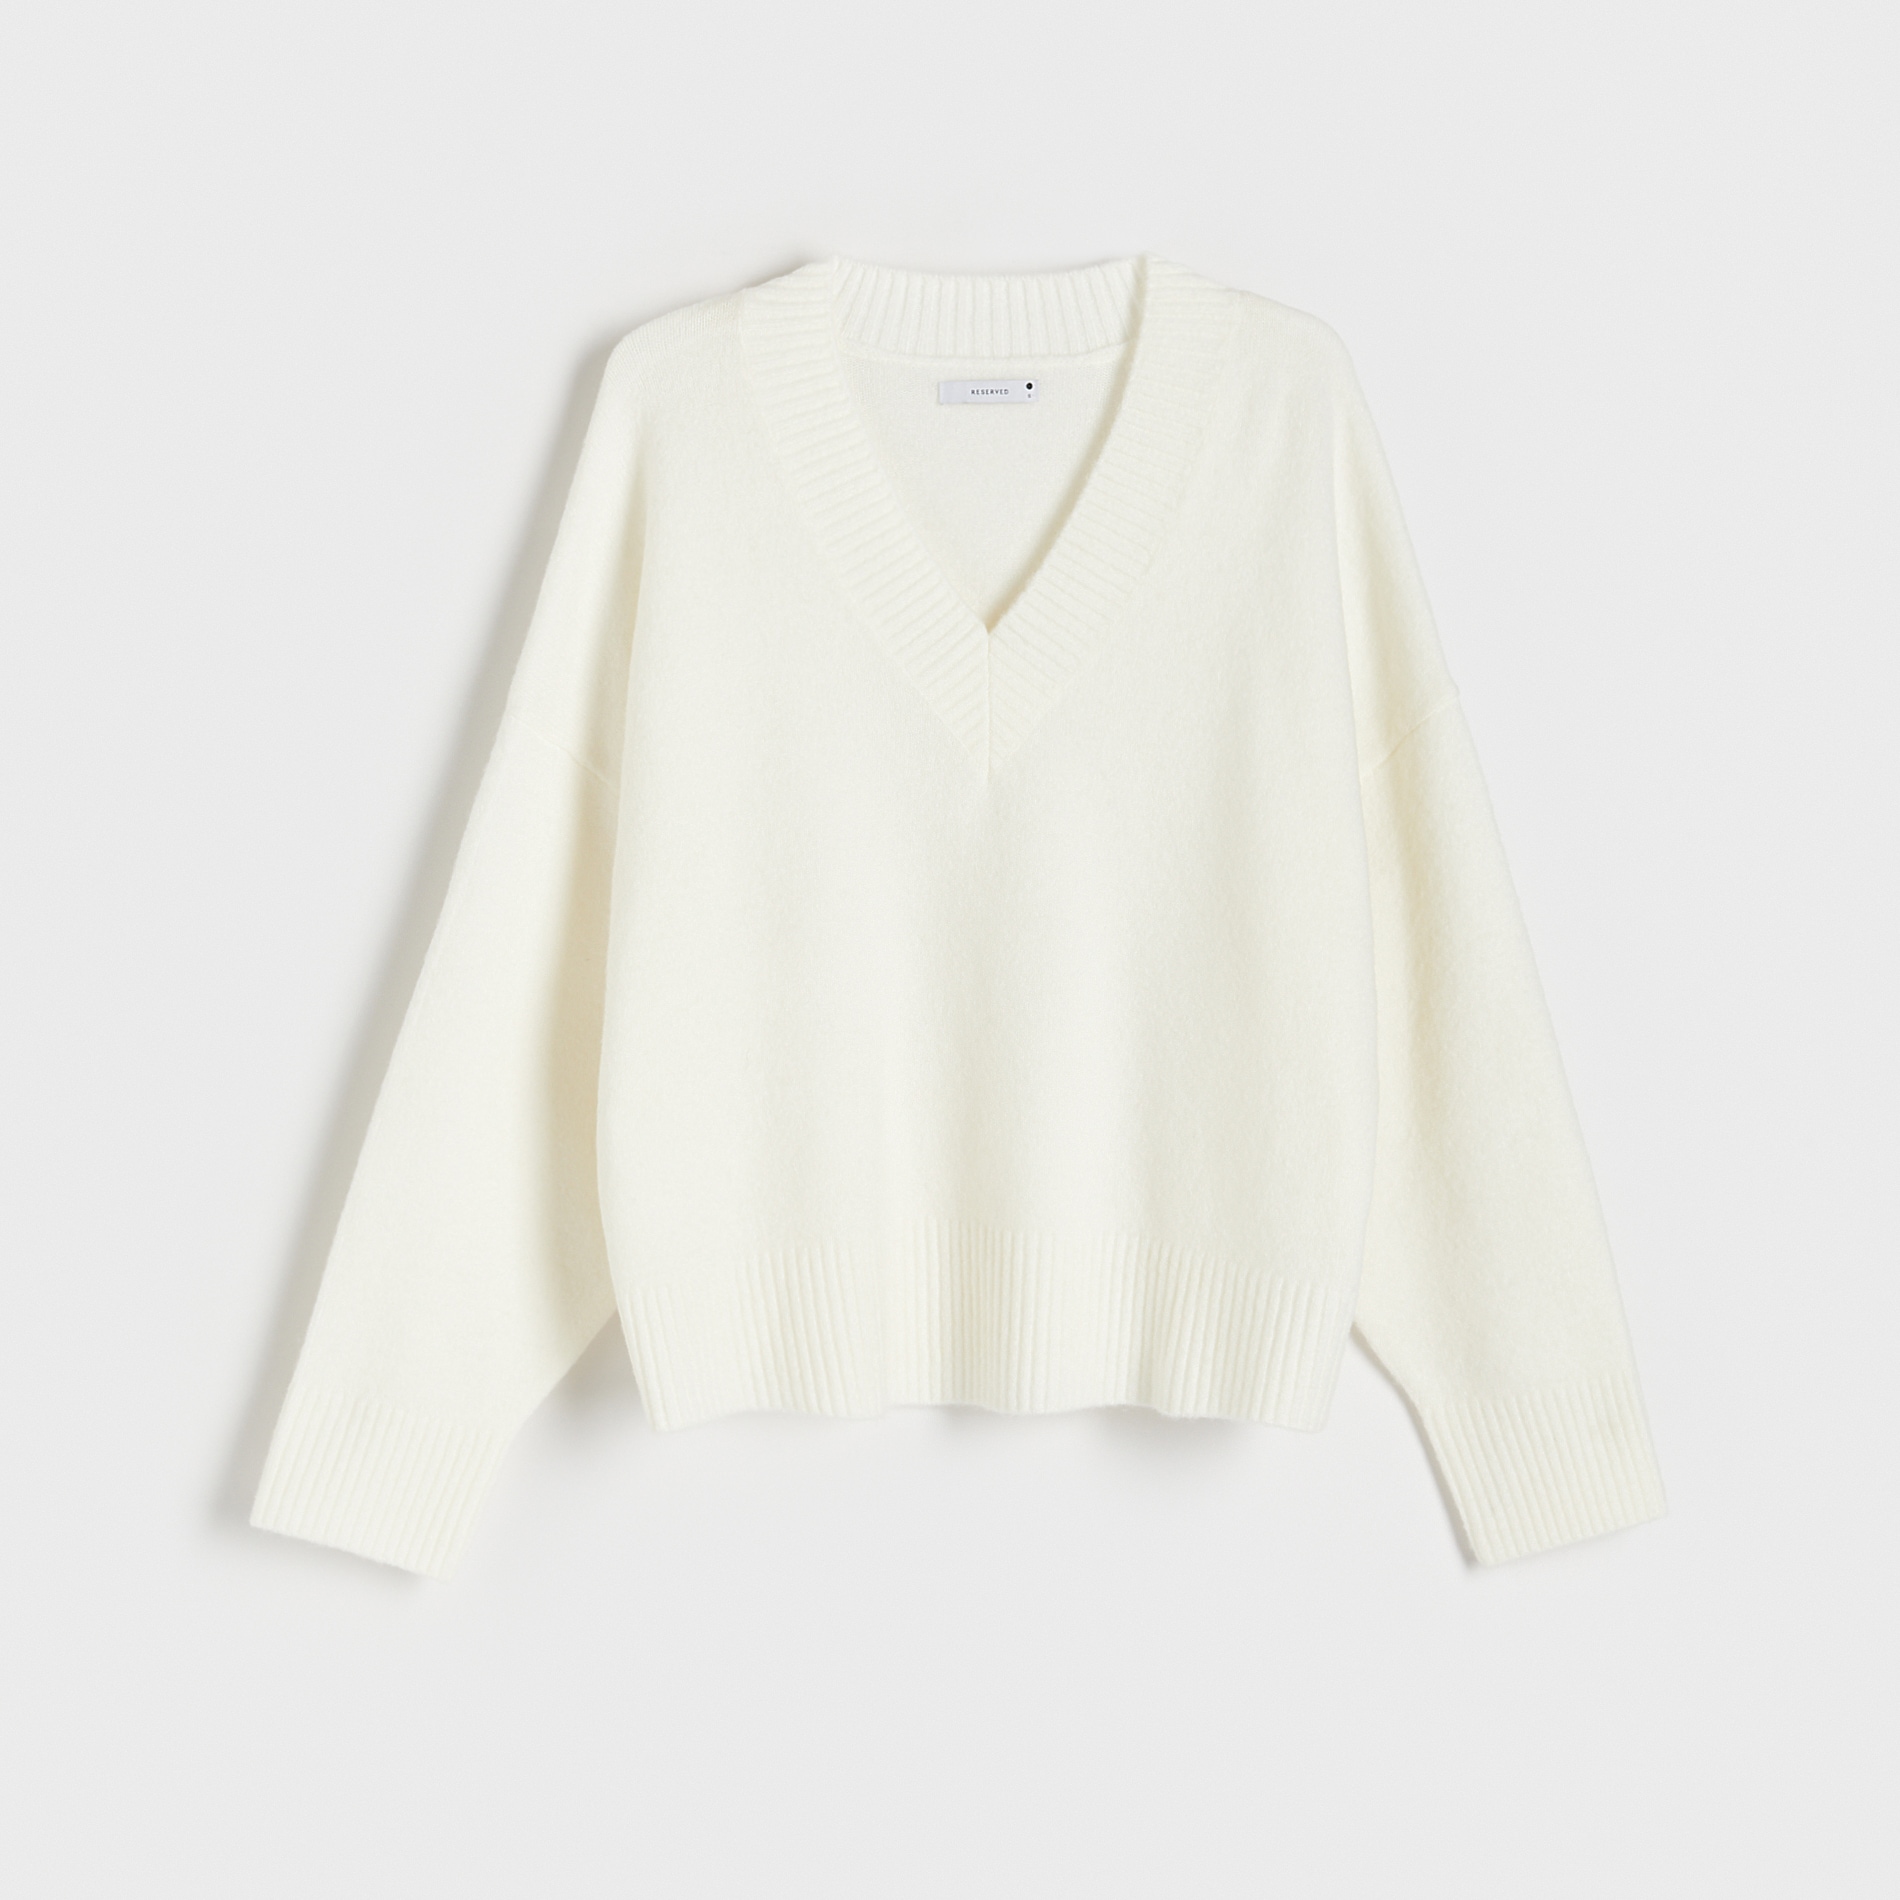 Reserved - Pulover oversized - Ivory